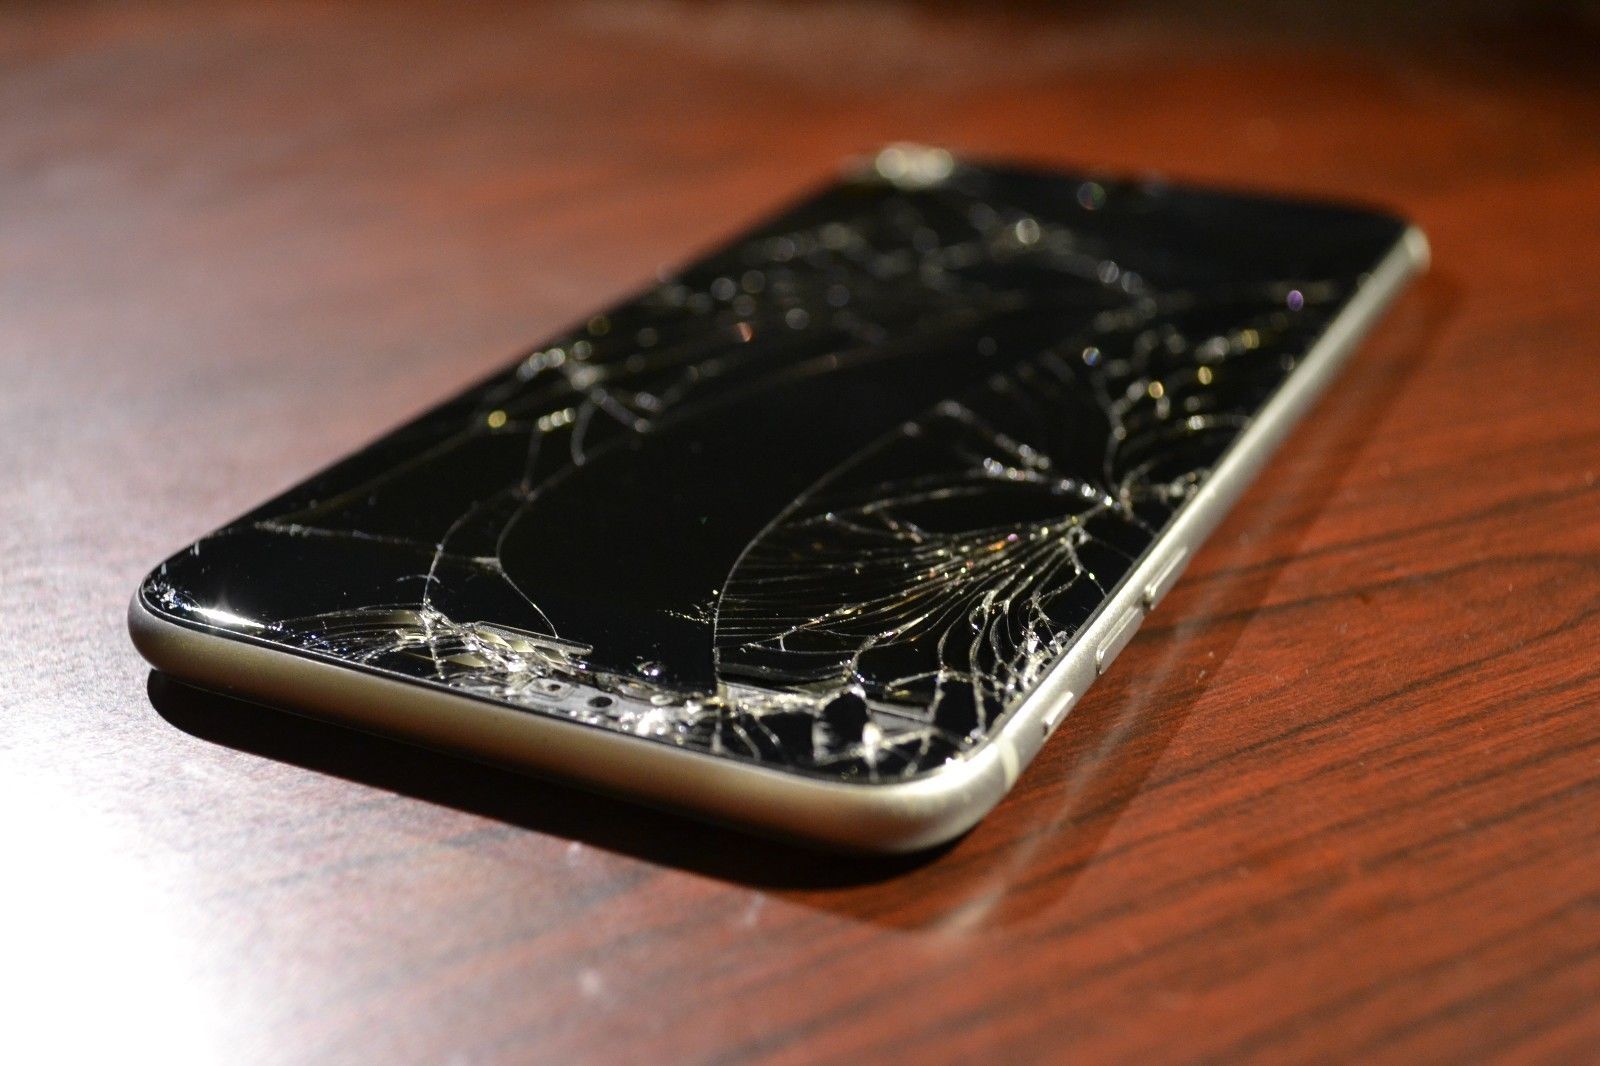 How to Buy Broken Phones for Your Cell Phone Repair Business - ToughNickel